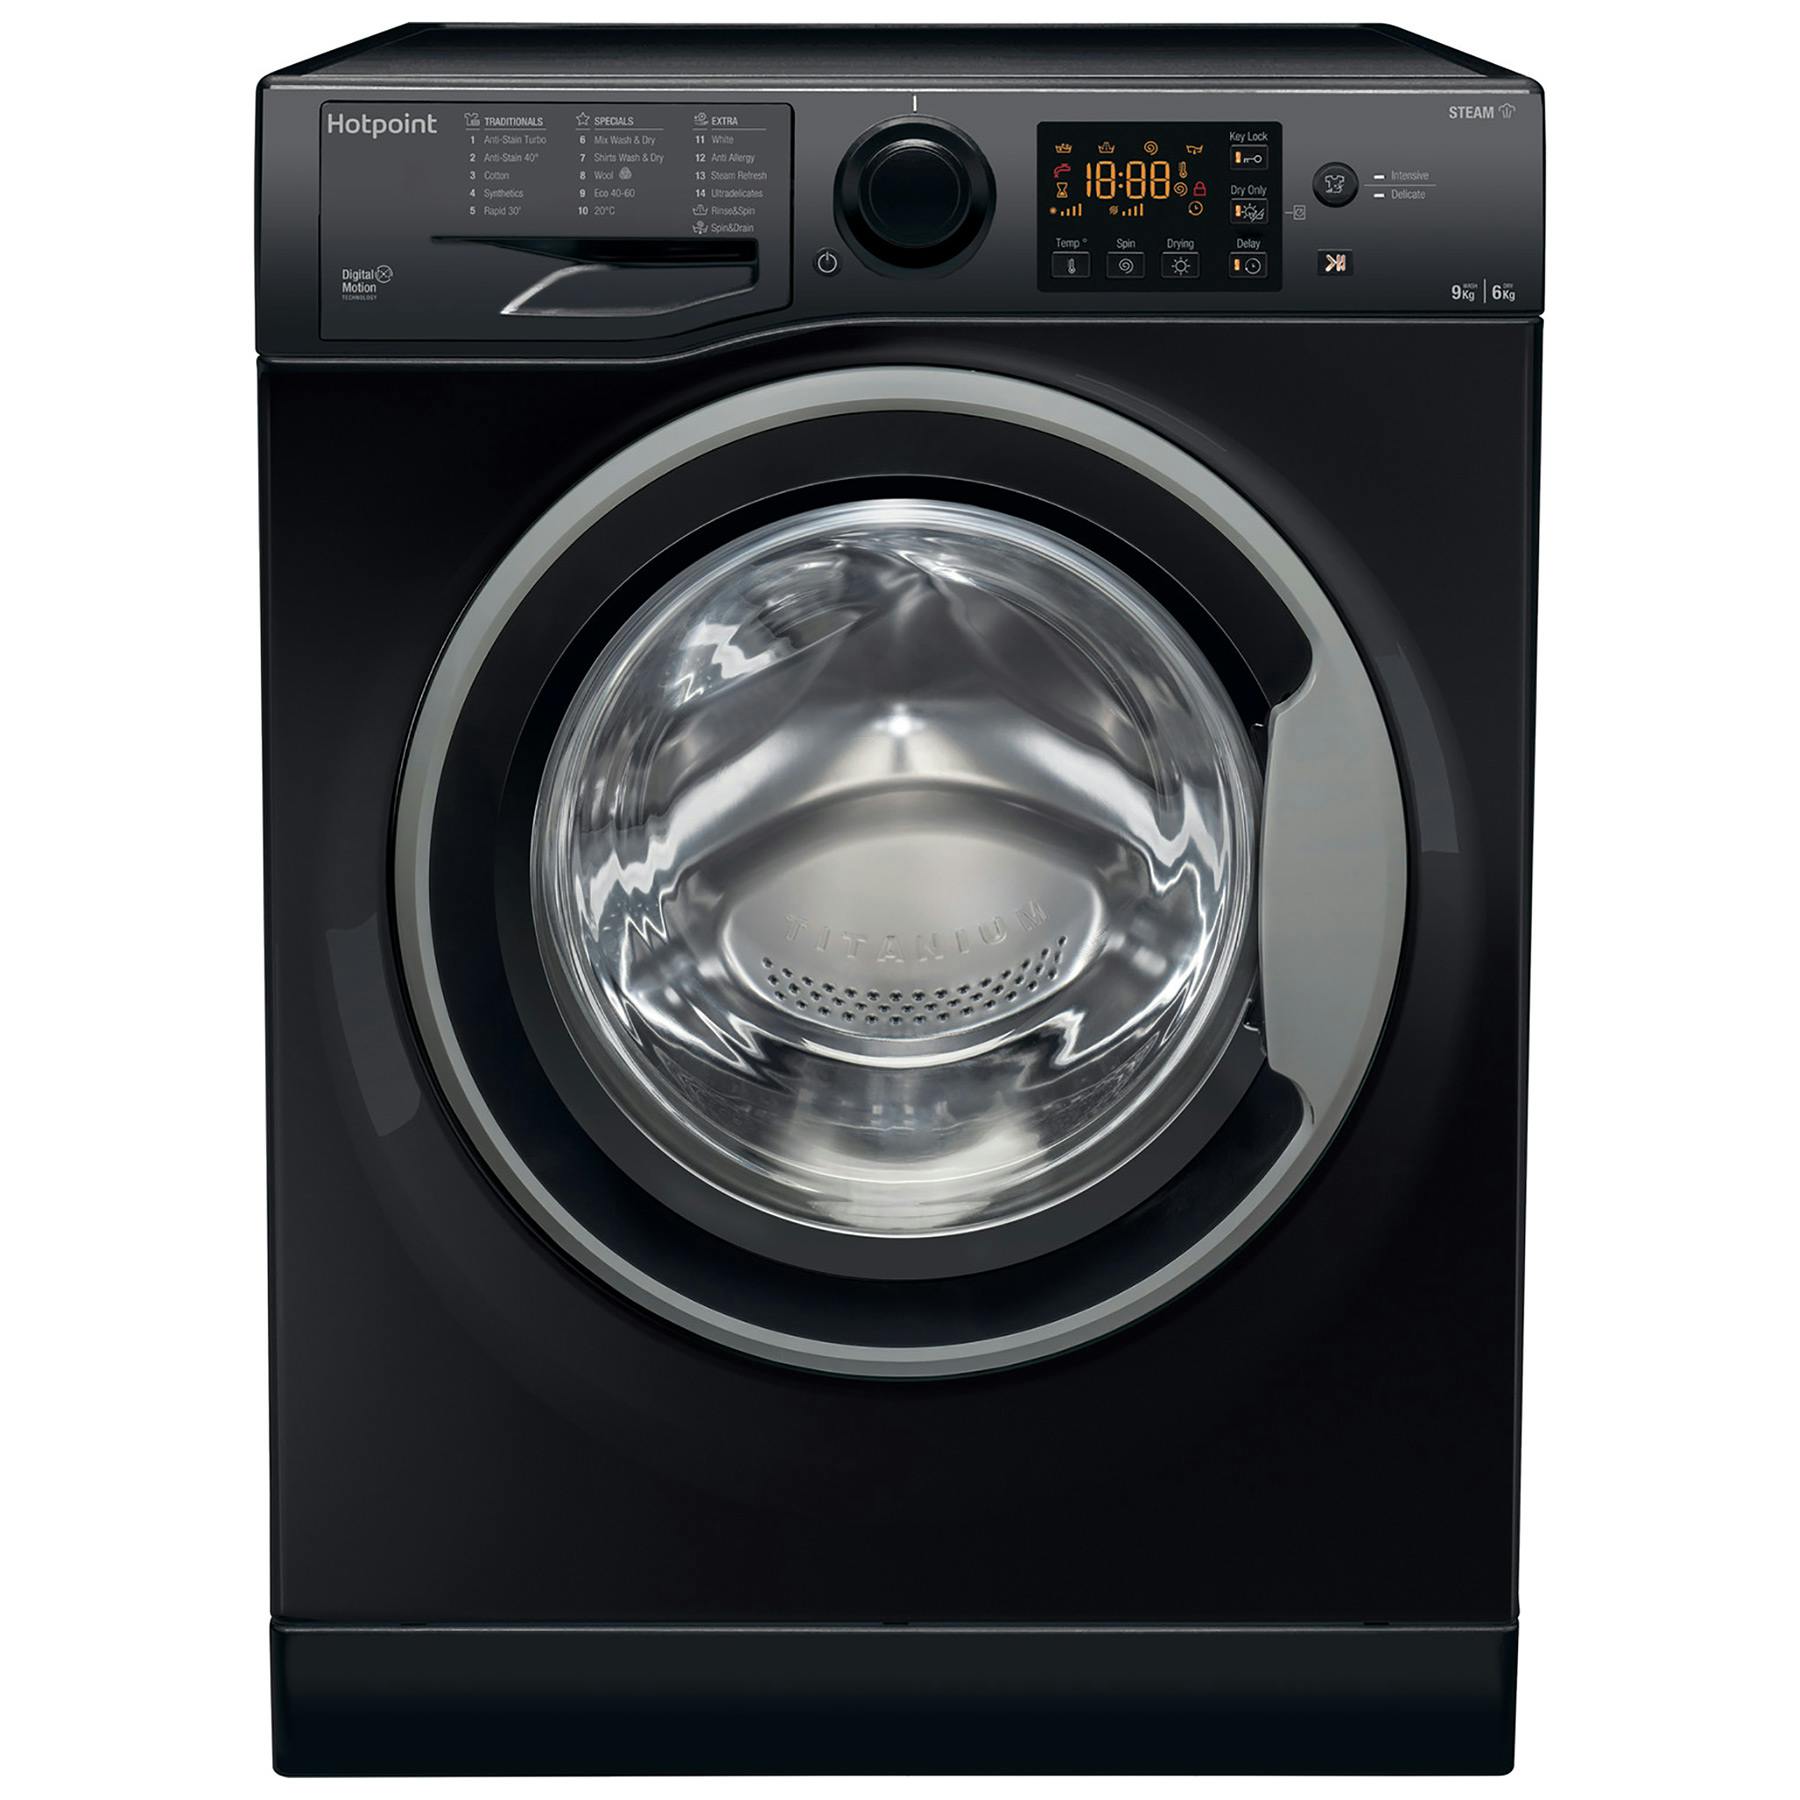 Chat hotpoint live Hotpoint Washing